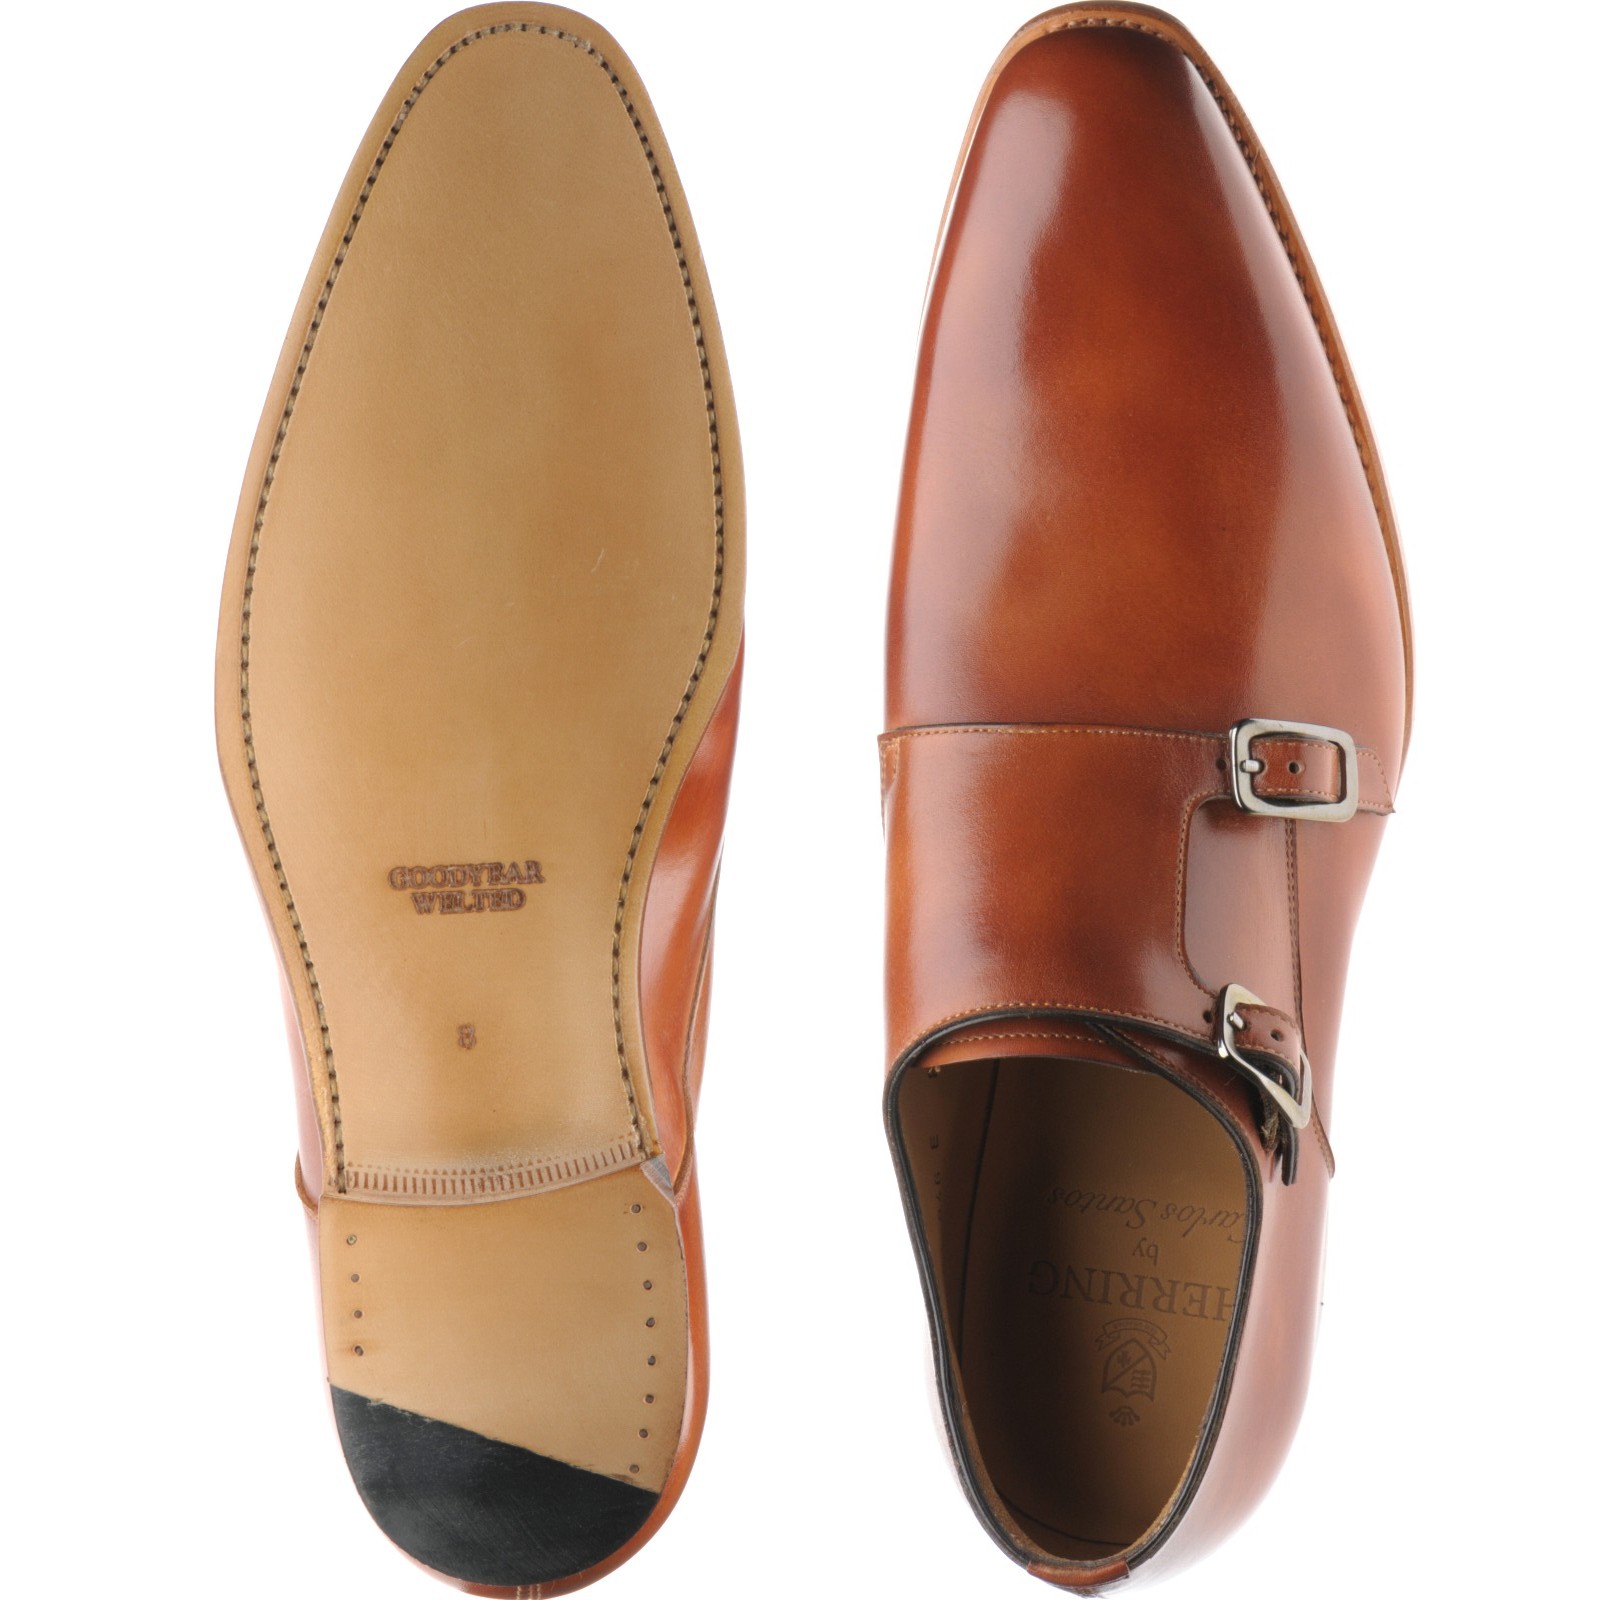 Herring shoes | Herring Classic | Shakespeare double monk shoes in Tan ...